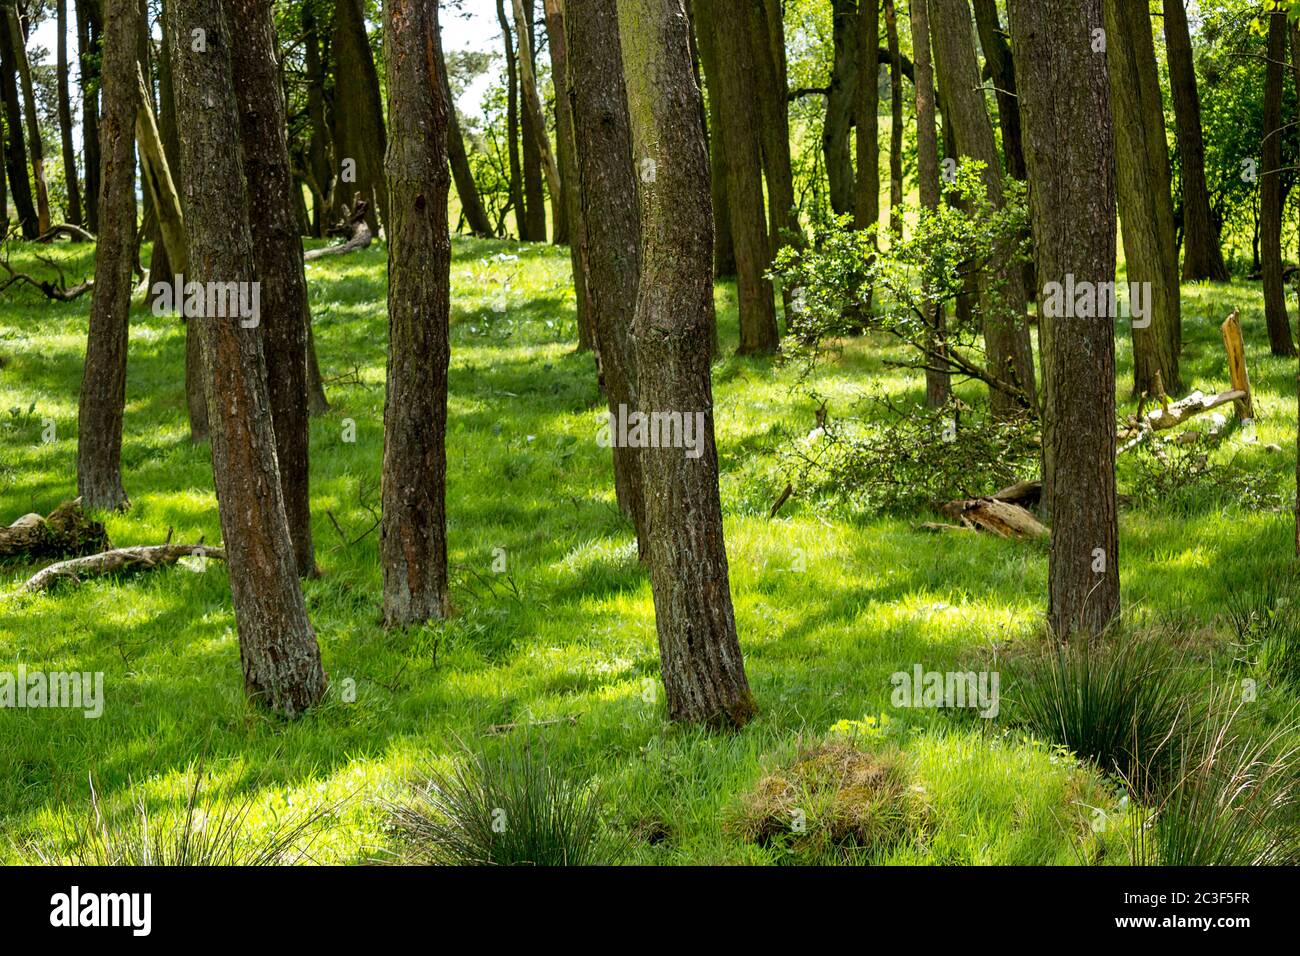 Glen Mavis, North Lanarkshire, Scotland. Beautiful Spring forest with trees and bright green grass Stock Photo